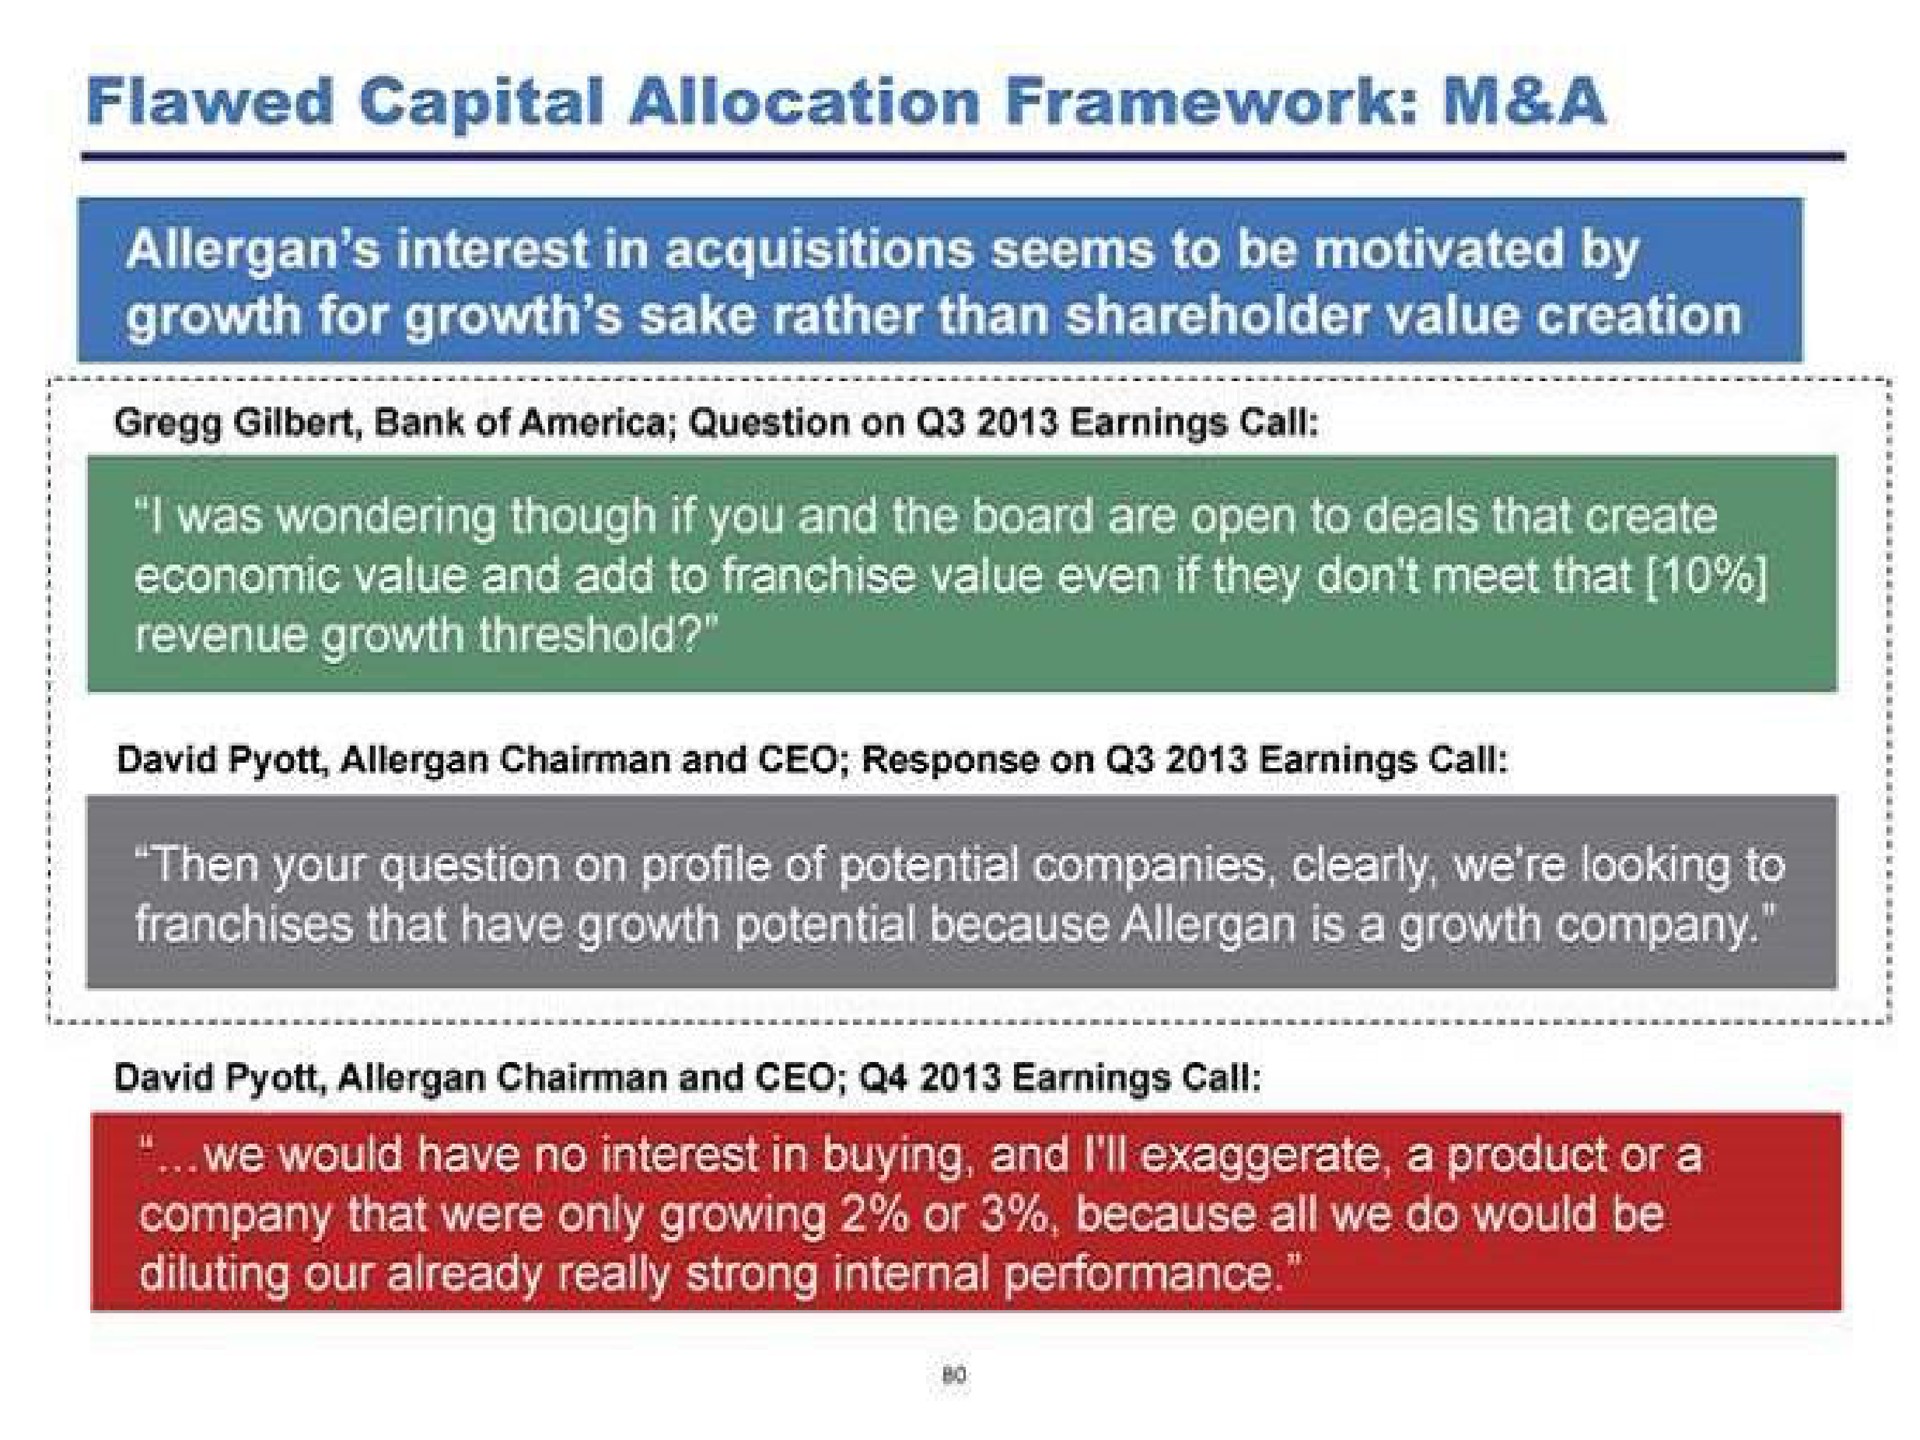 flawed capital allocation framework gilbert bank of question on earnings call | Pershing Square